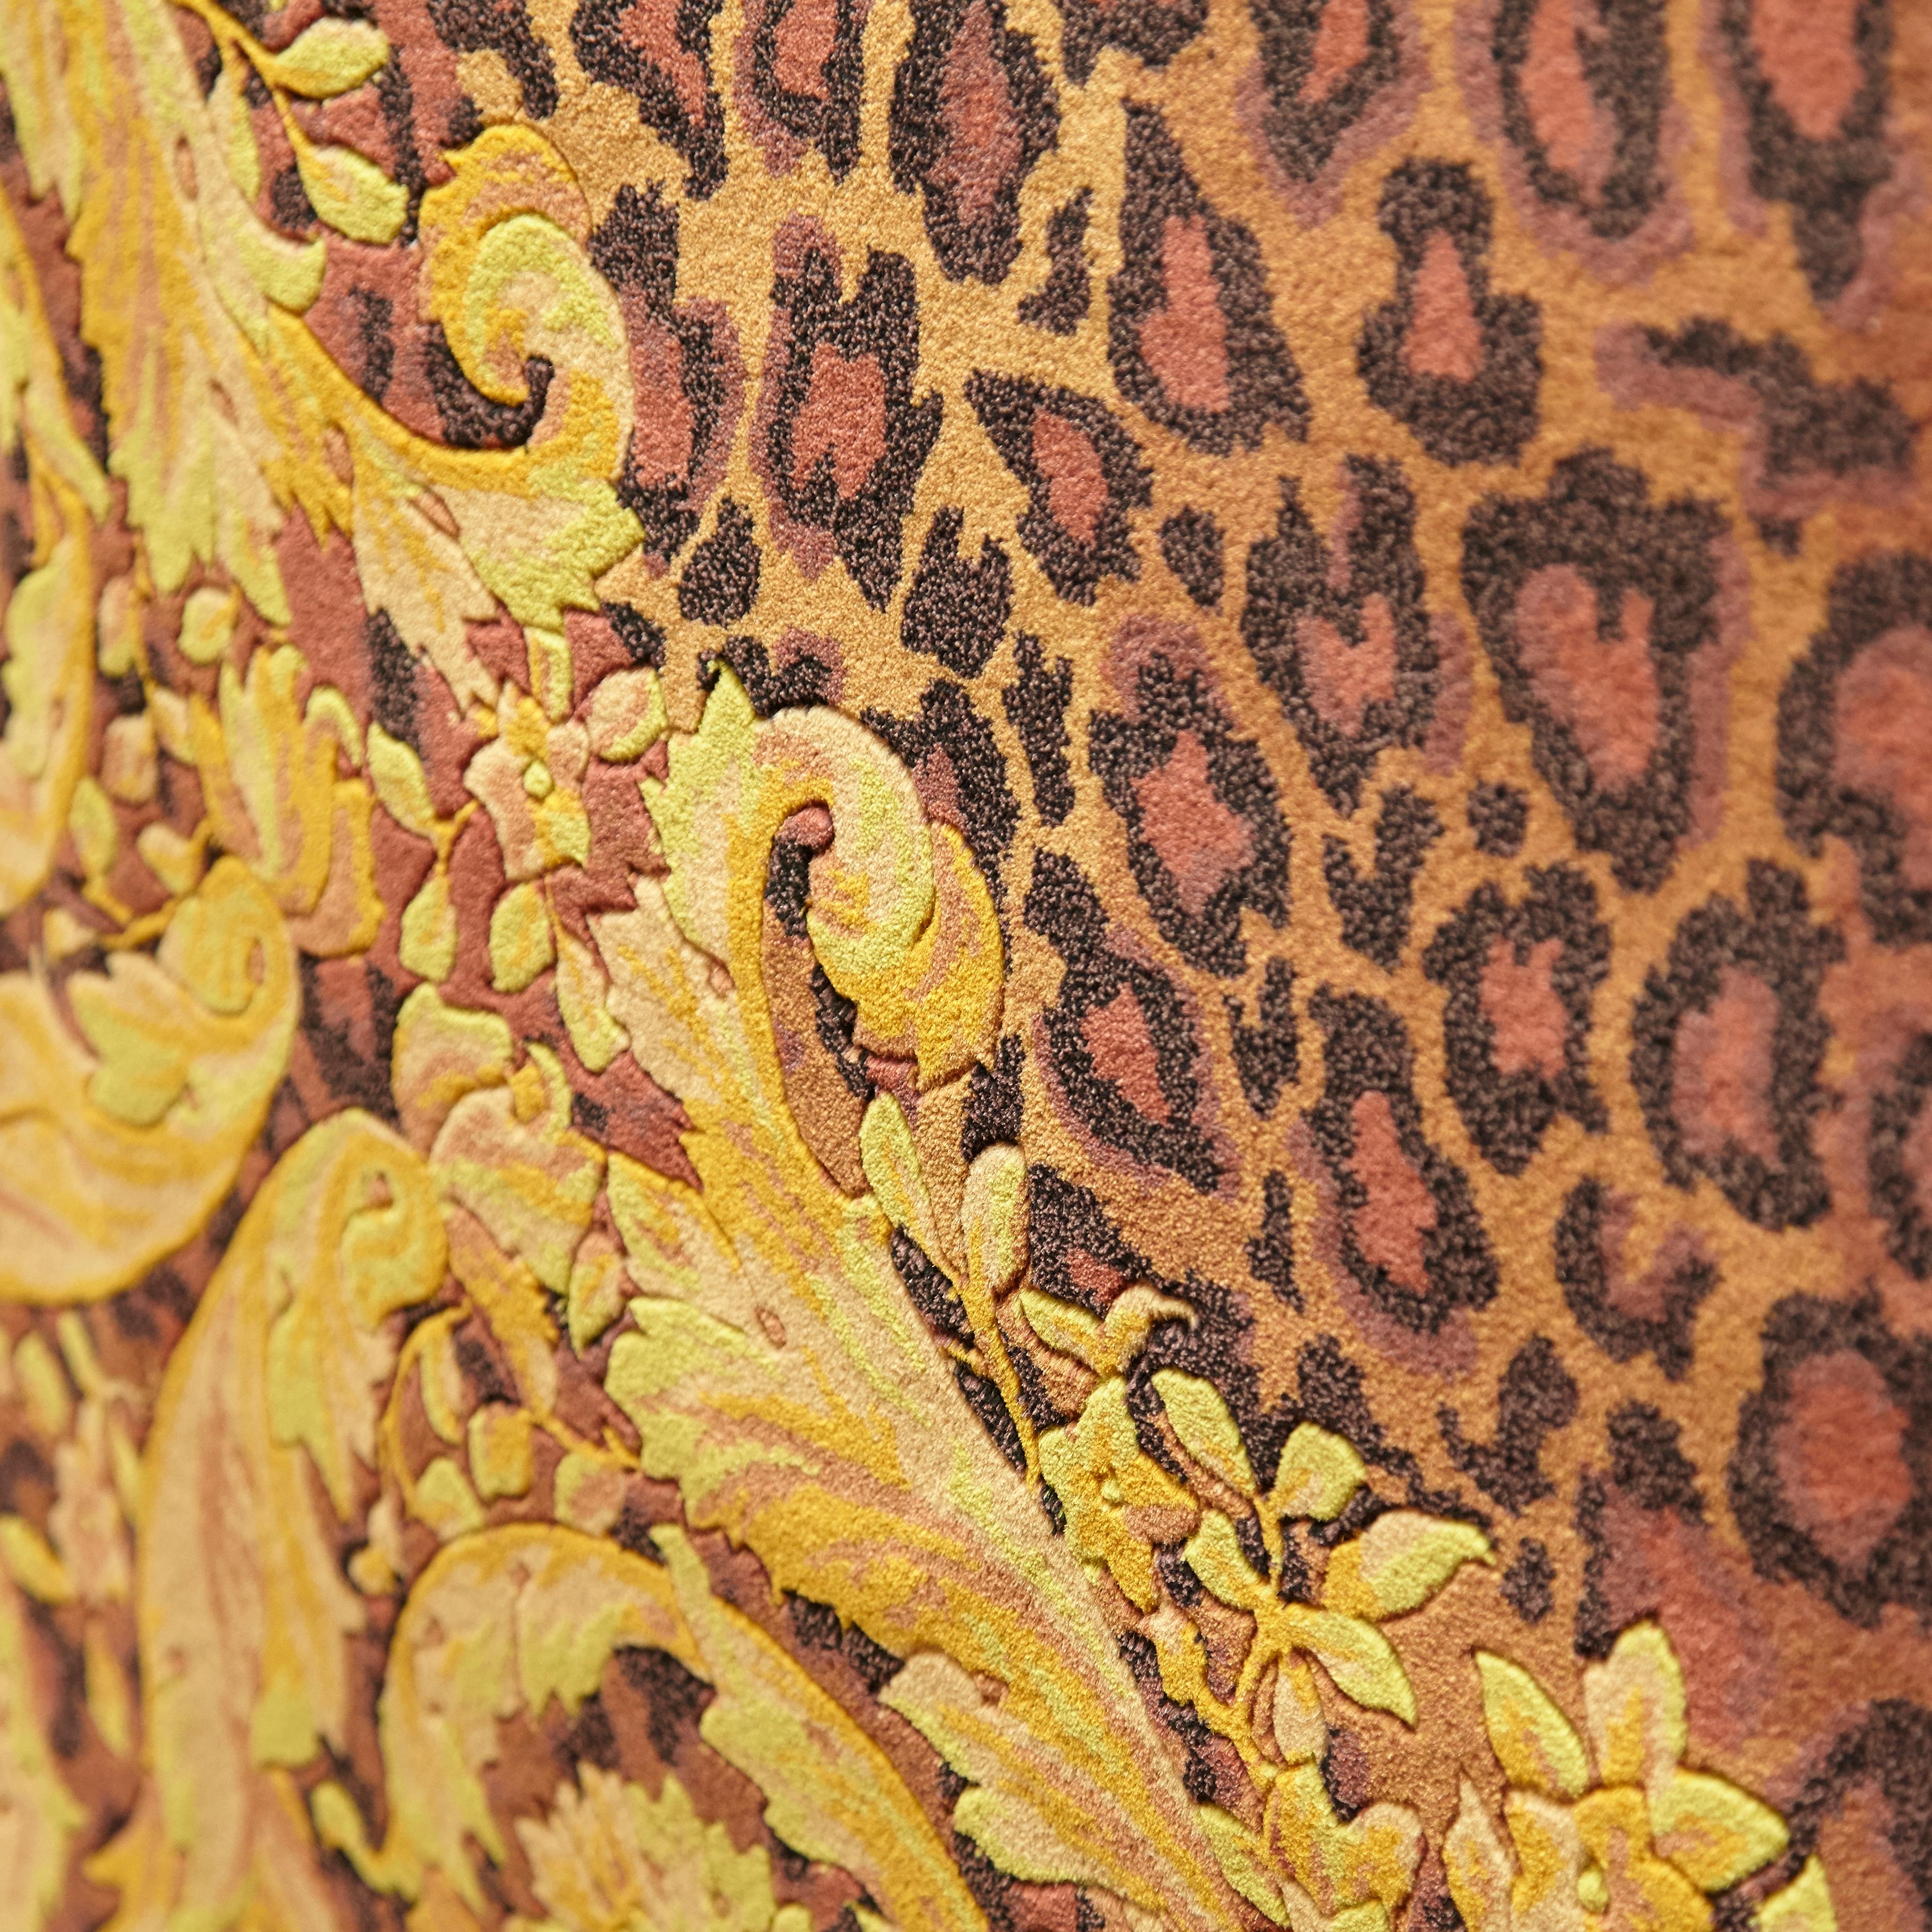 Gianni Versace Collection Rug Wild Barocco, Gold Leopard Animal Print, 1980 In Good Condition In Barcelona, Barcelona